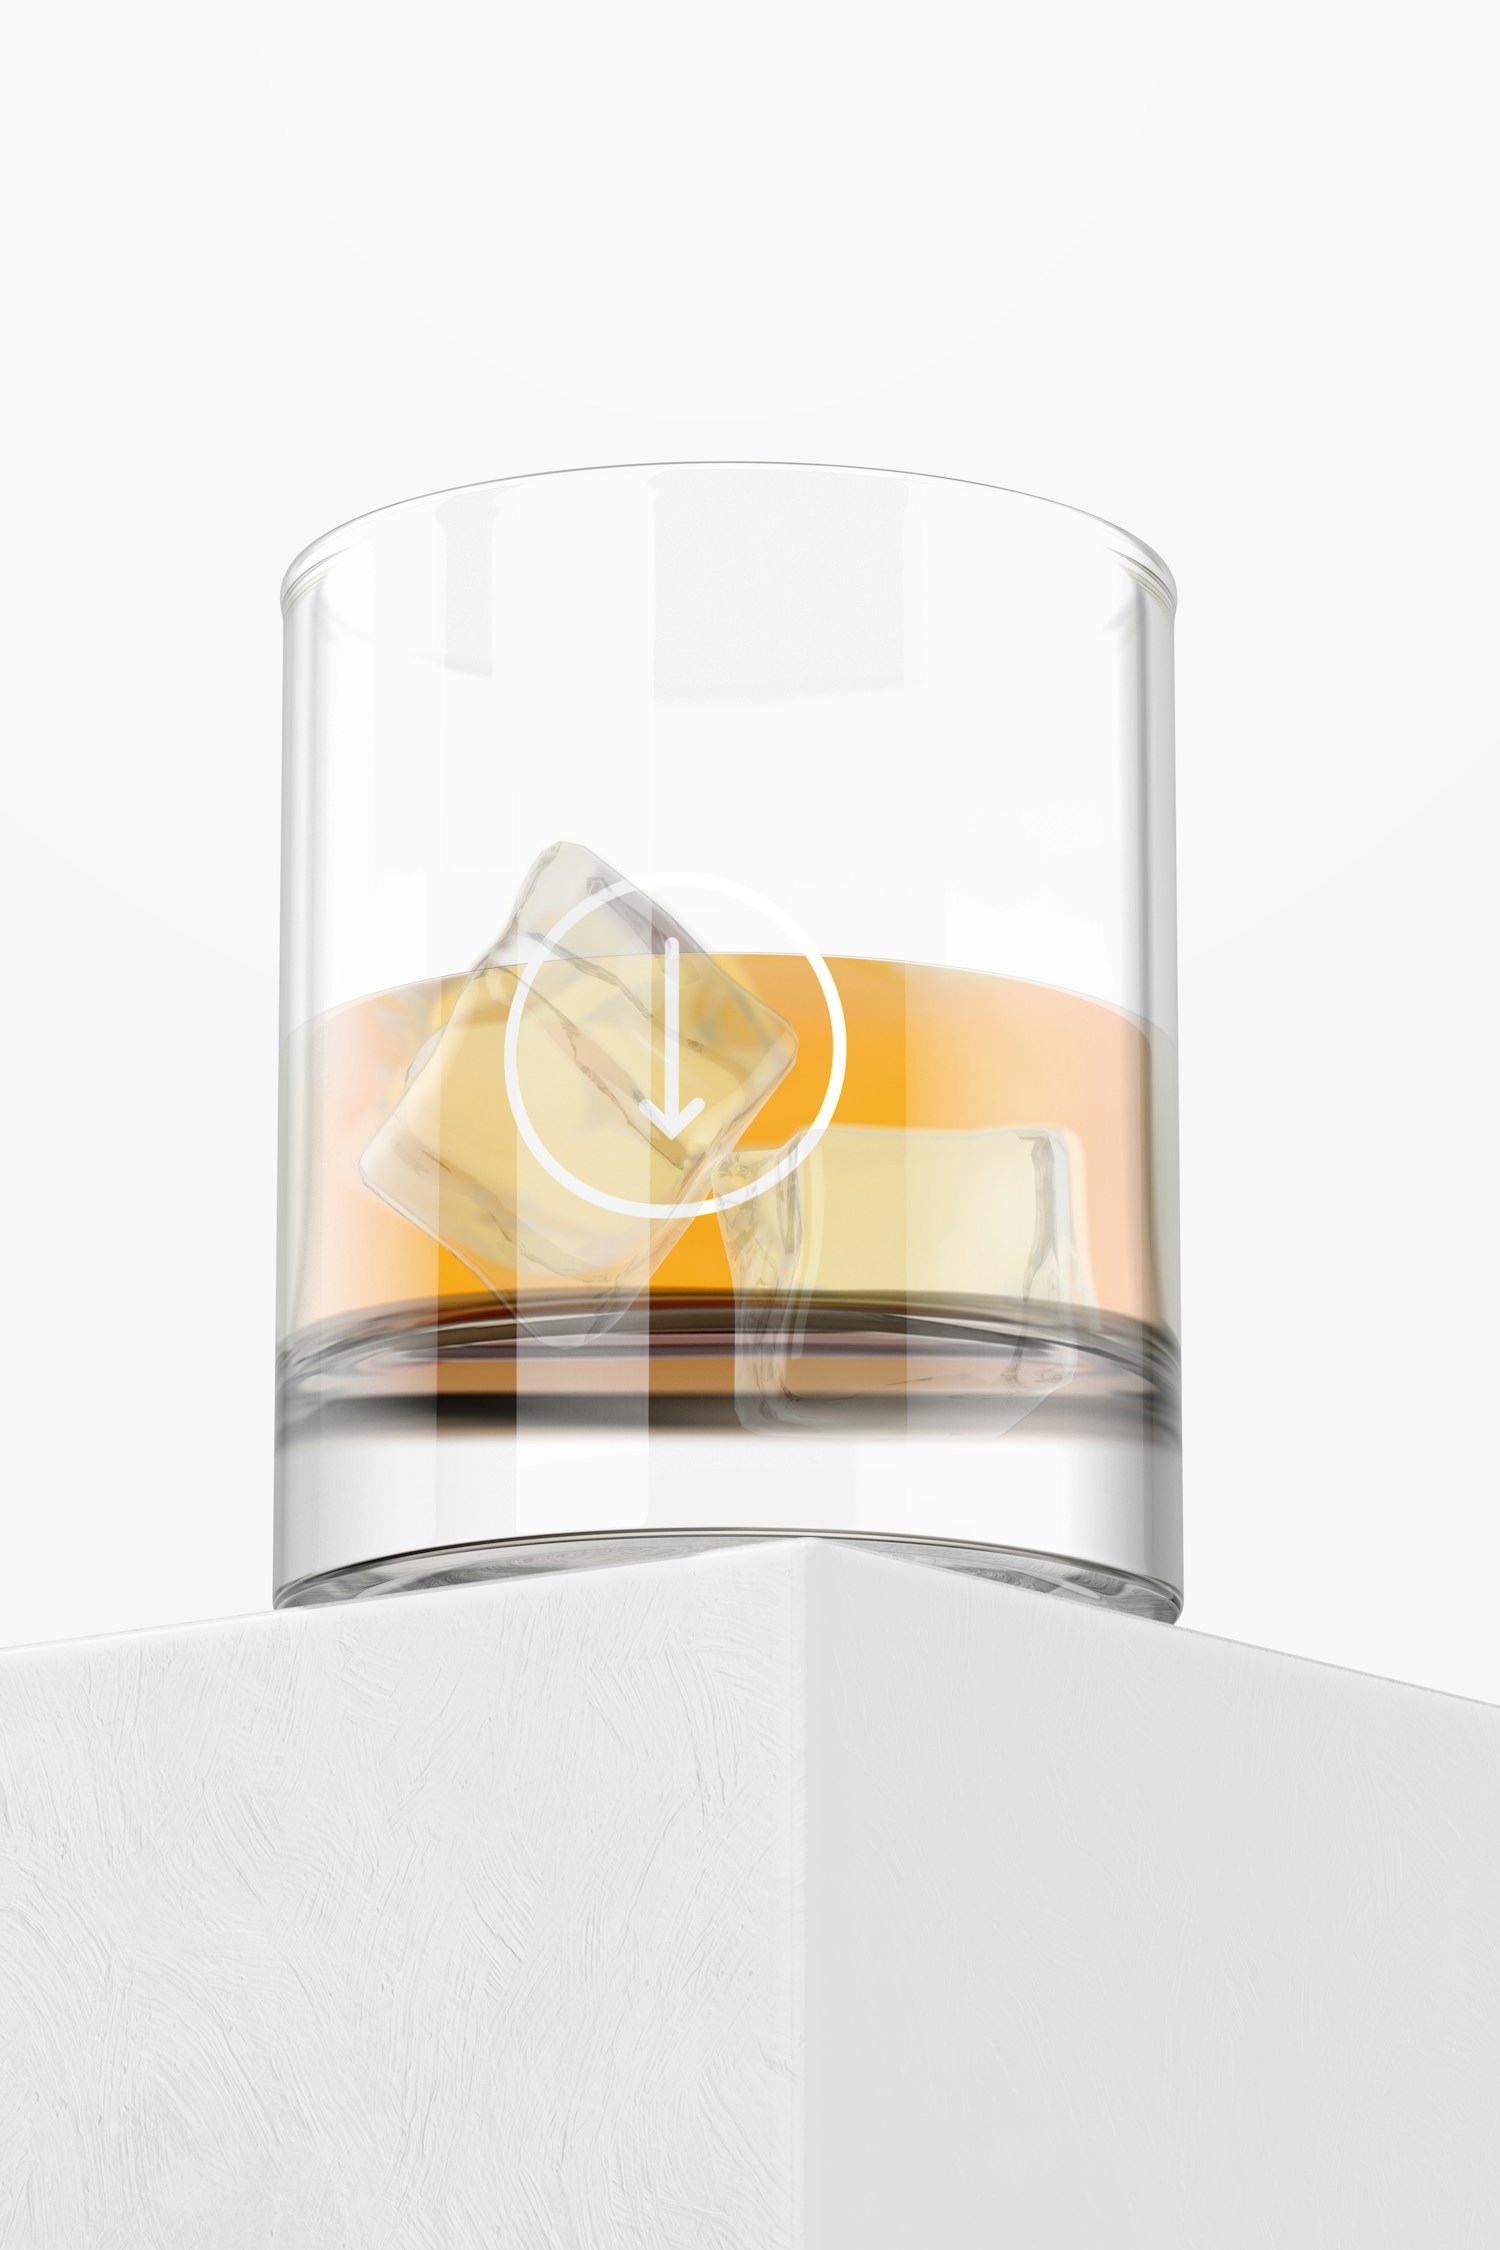 11 oz Whiskey Glass Cup Mockup, Perspective